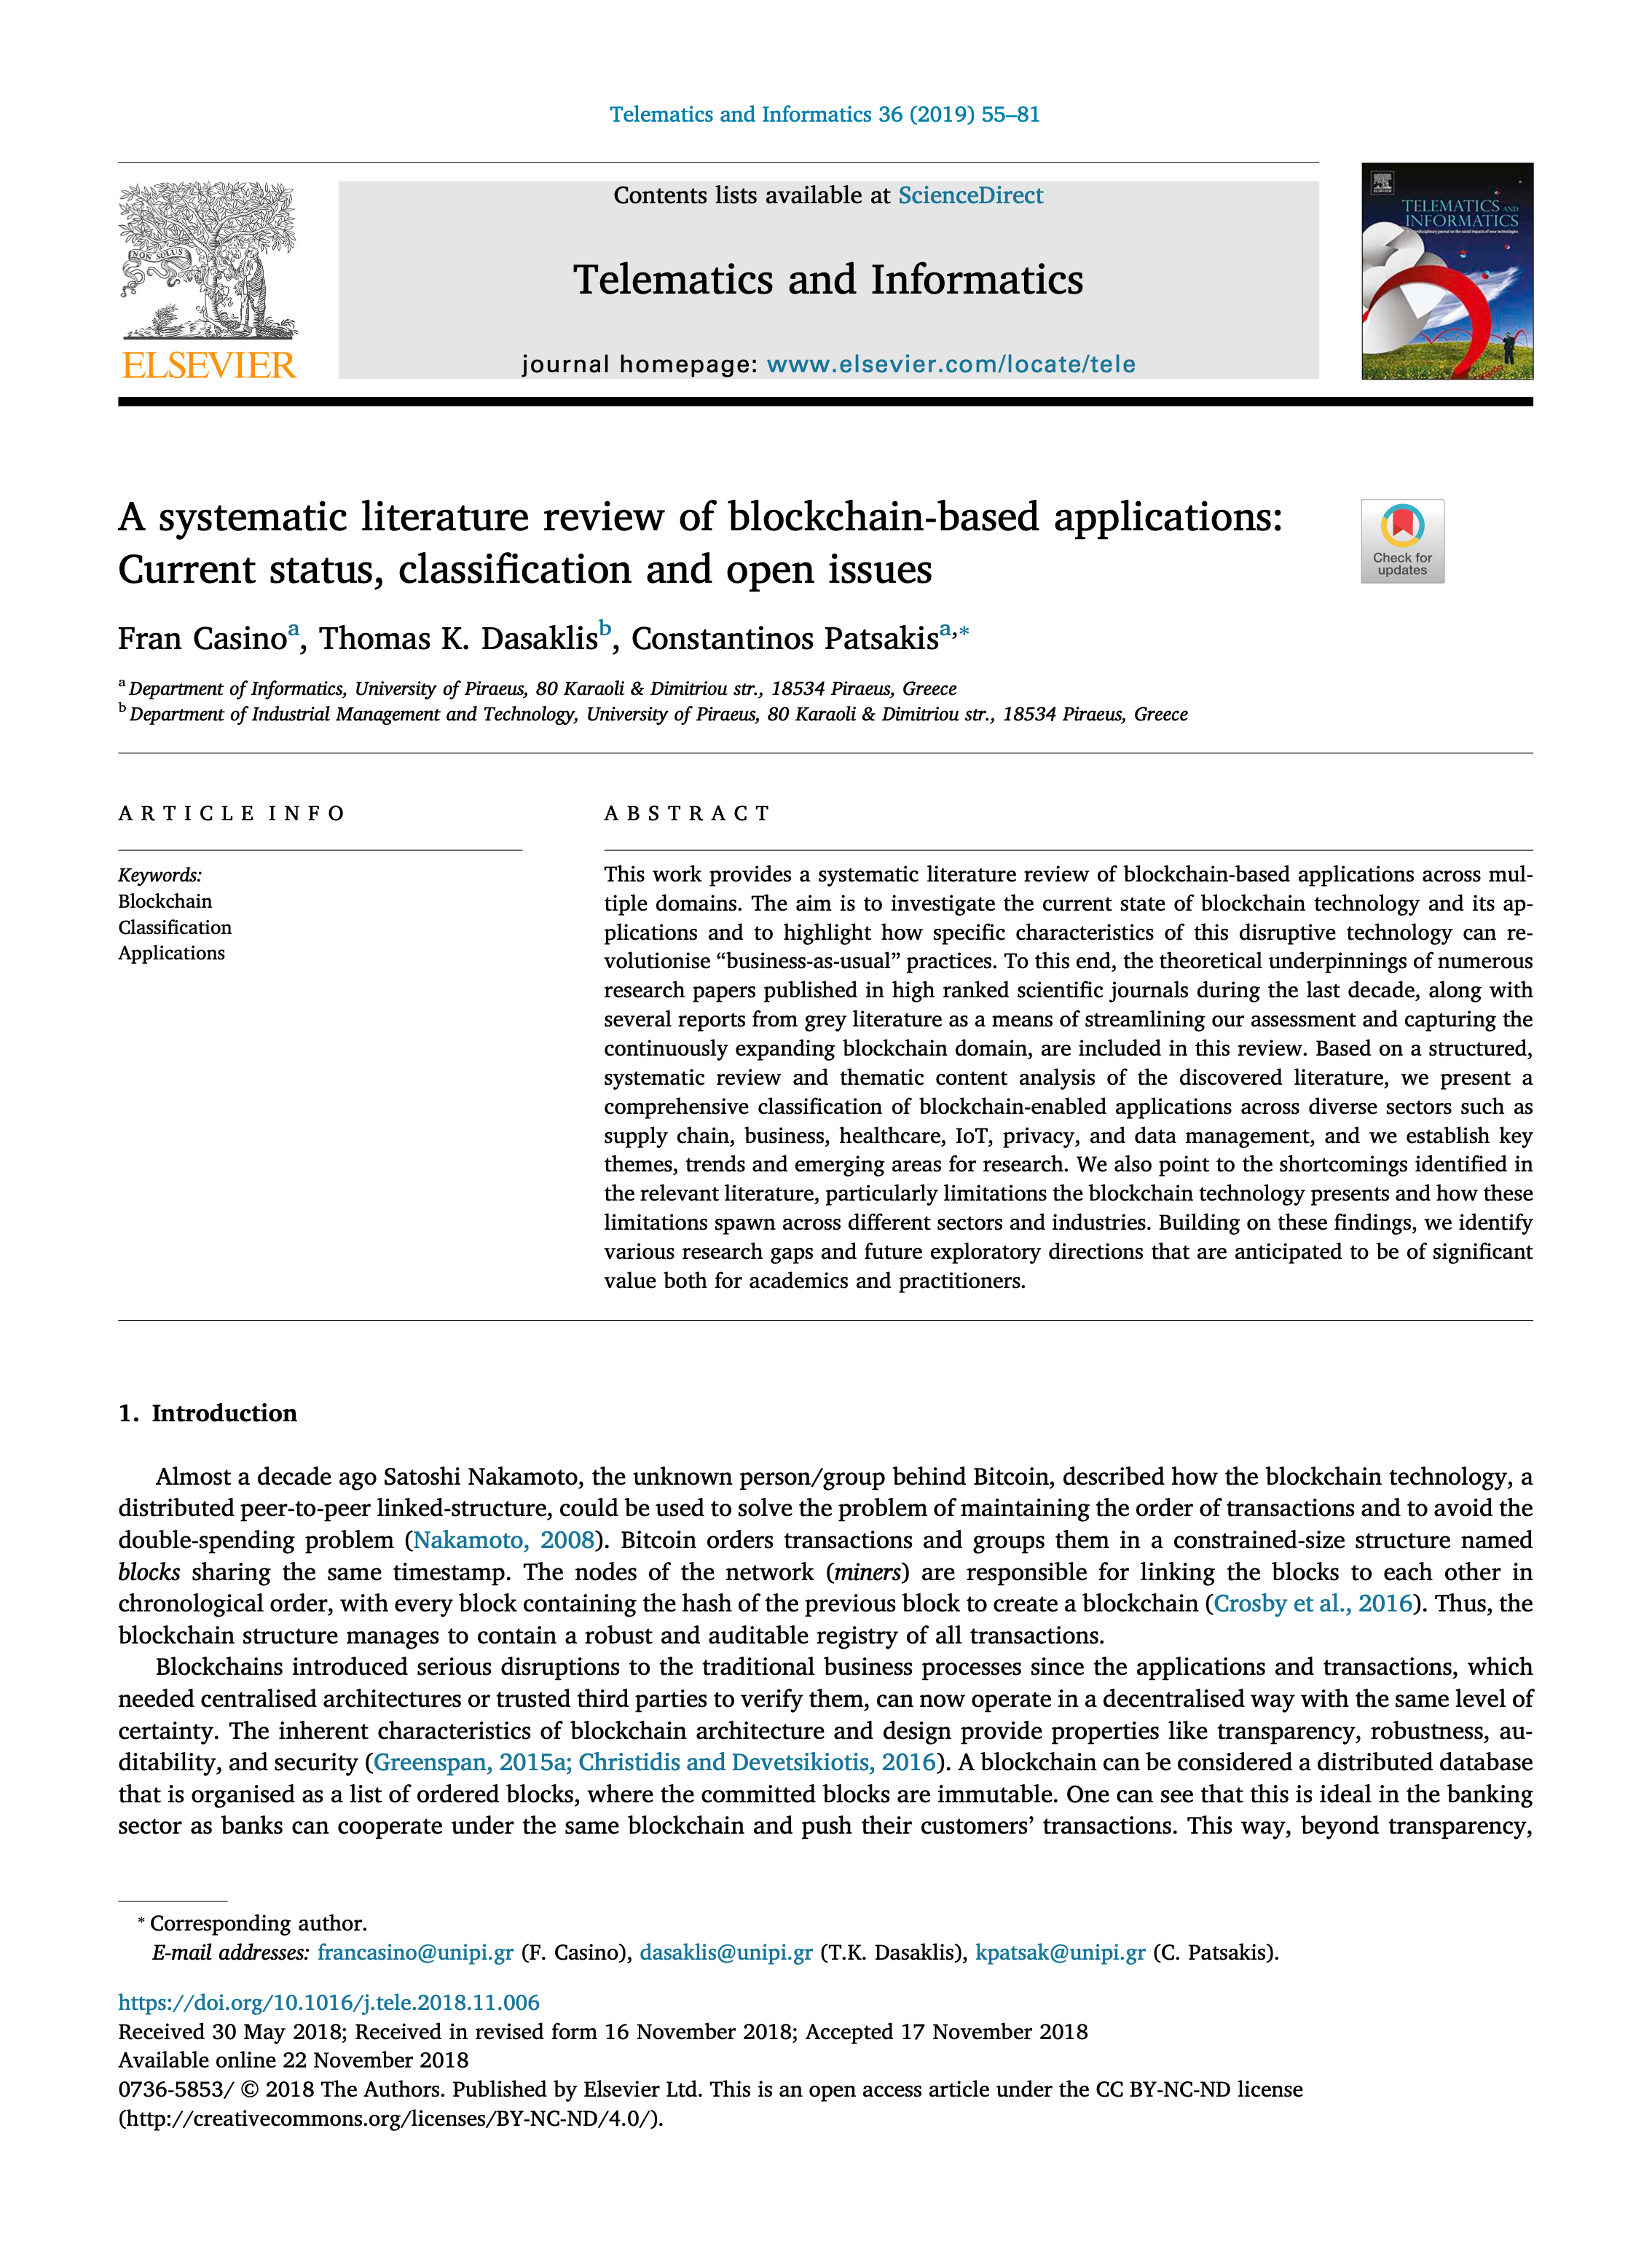 A systematic literature review of blockchain-based applications: Current status, classification and open issues